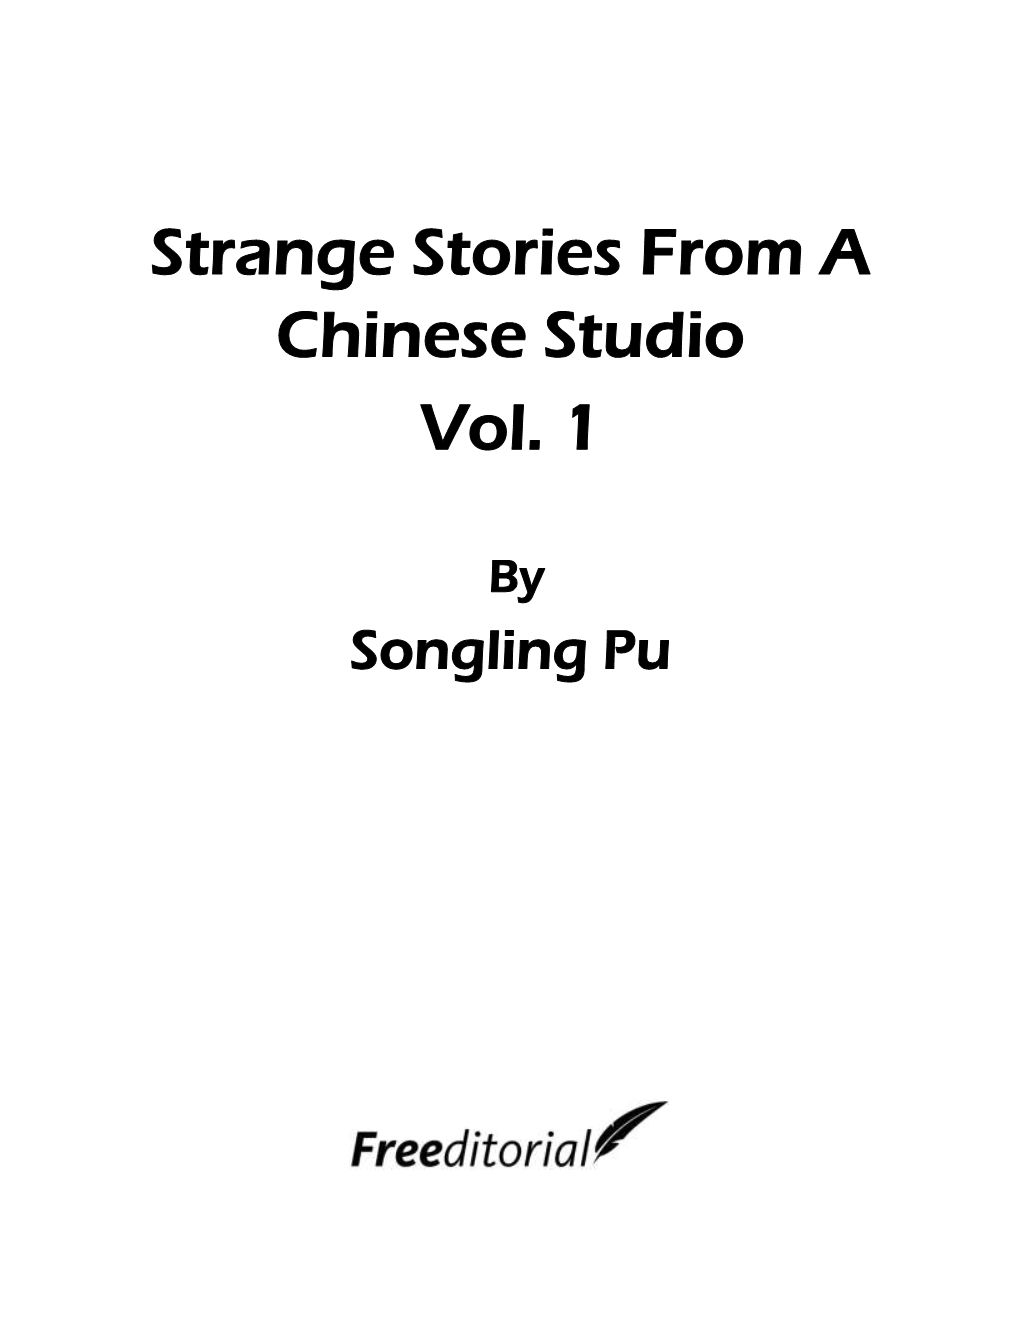 Strange Stories from a Chinese Studio Vol. 1